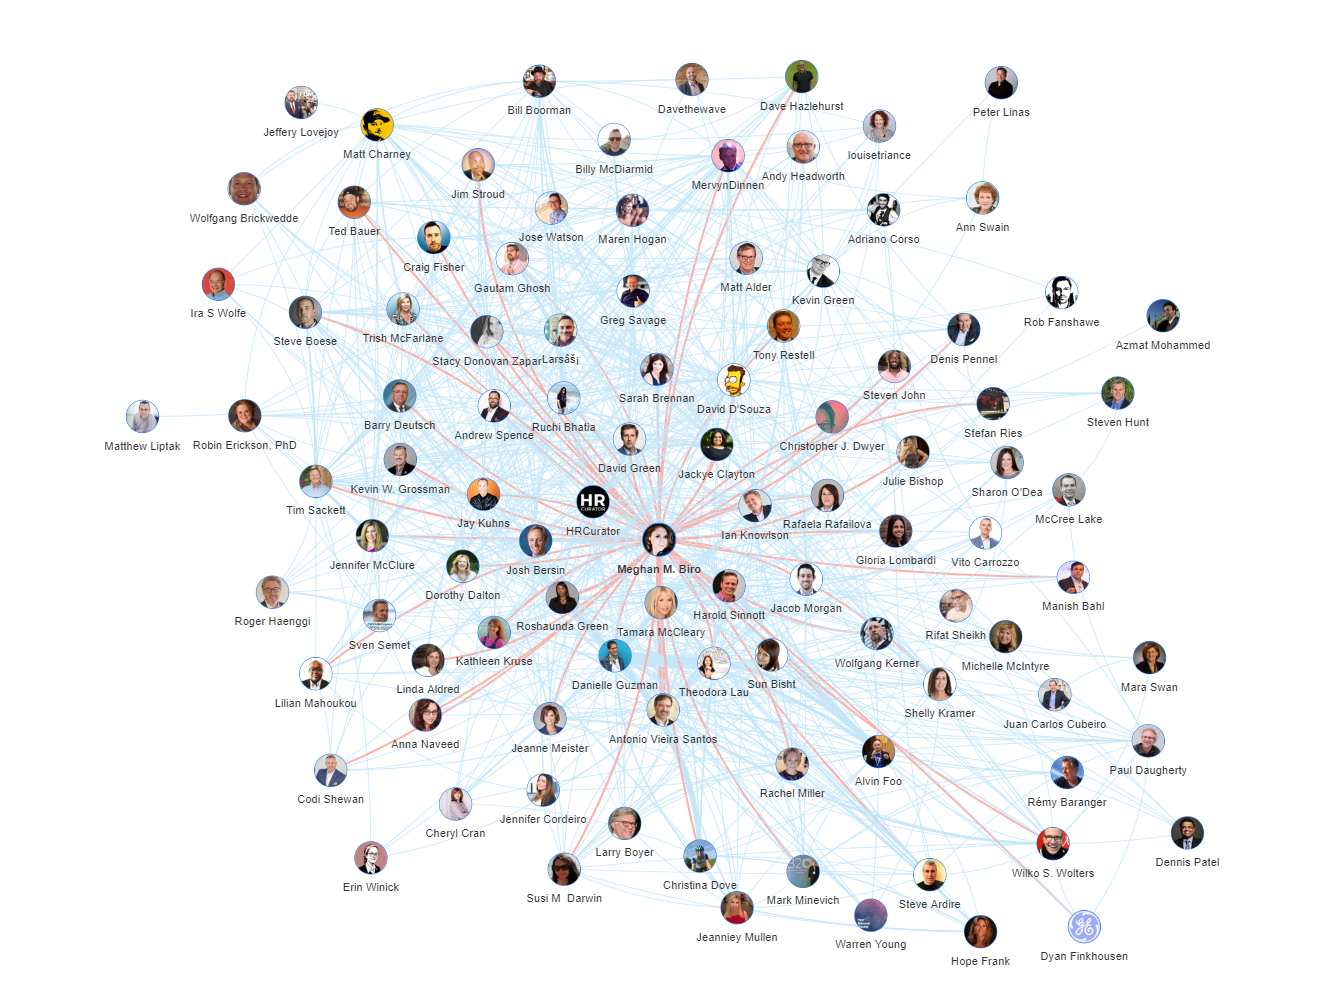 Onalytica Future of Recruitment Top 100 Influencers